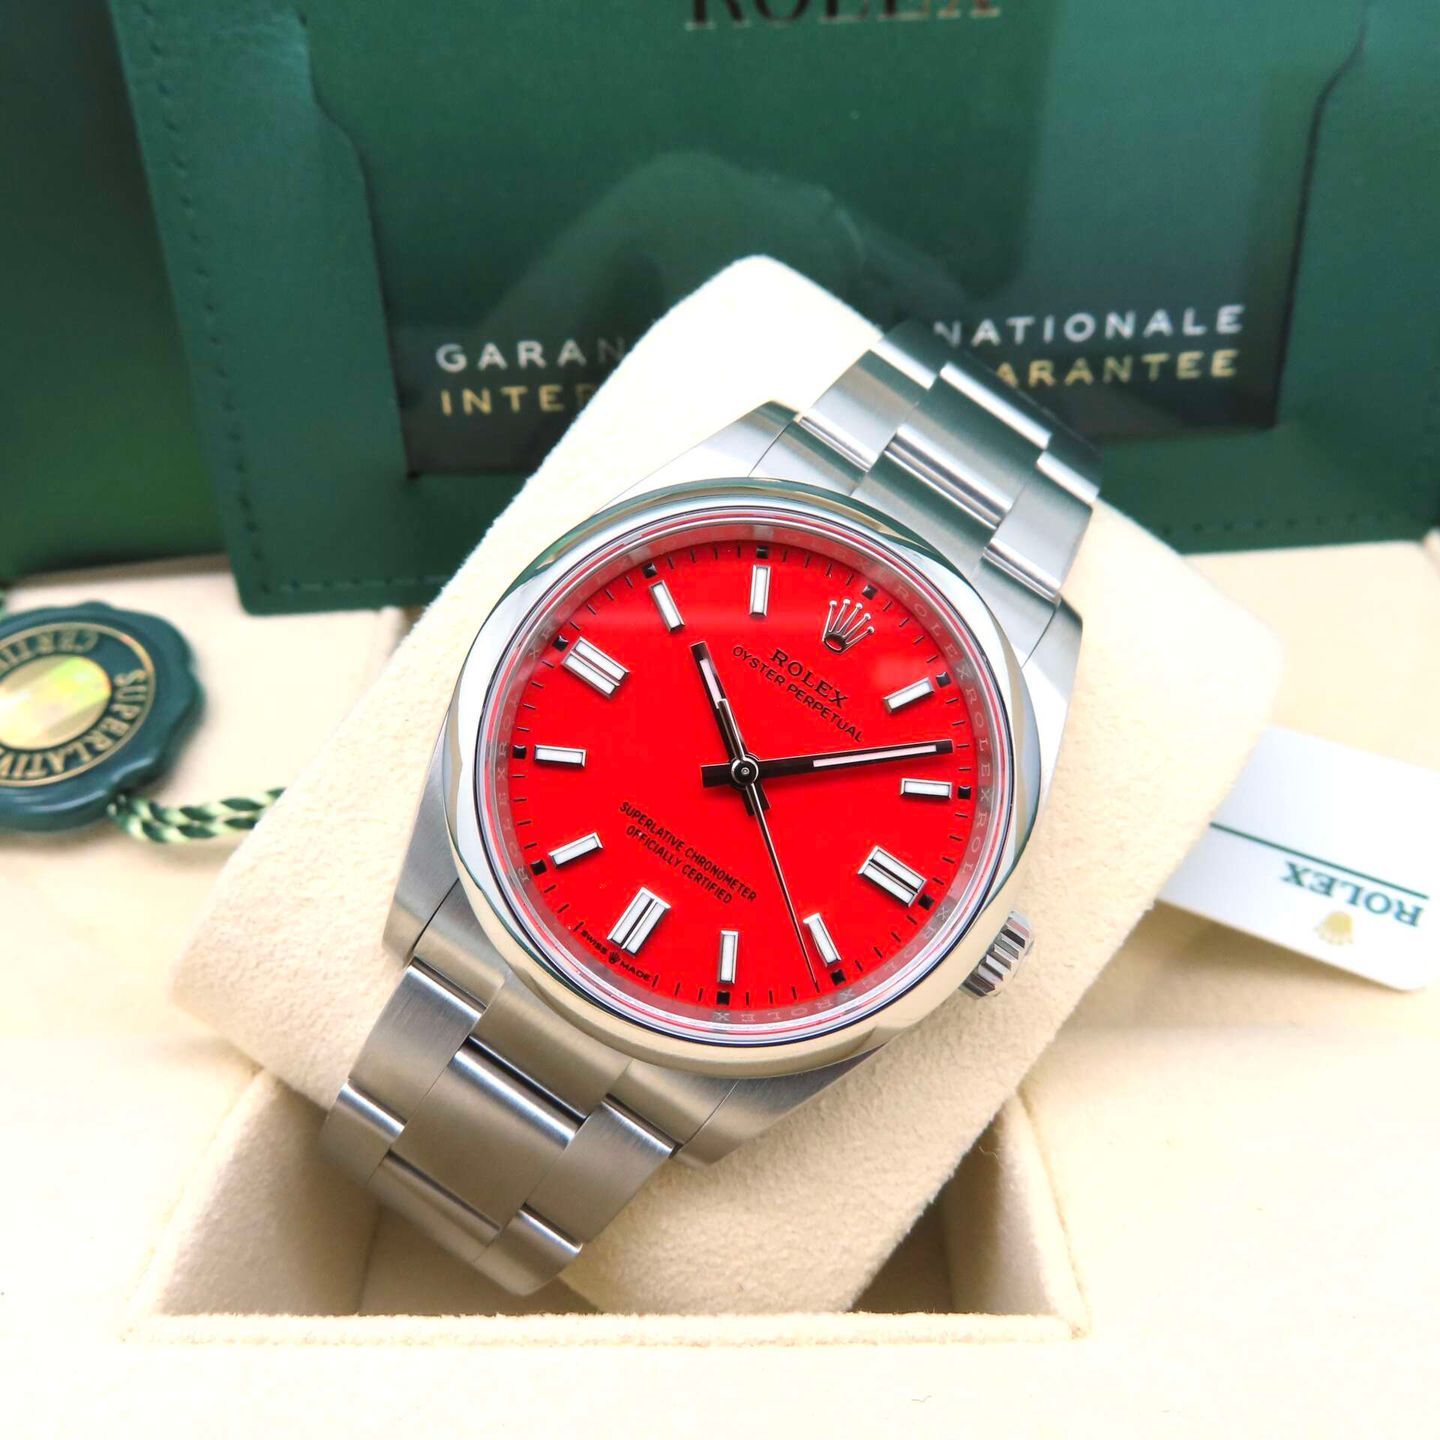 Rolex Oyster Perpetual 36 126000 - (8/8)